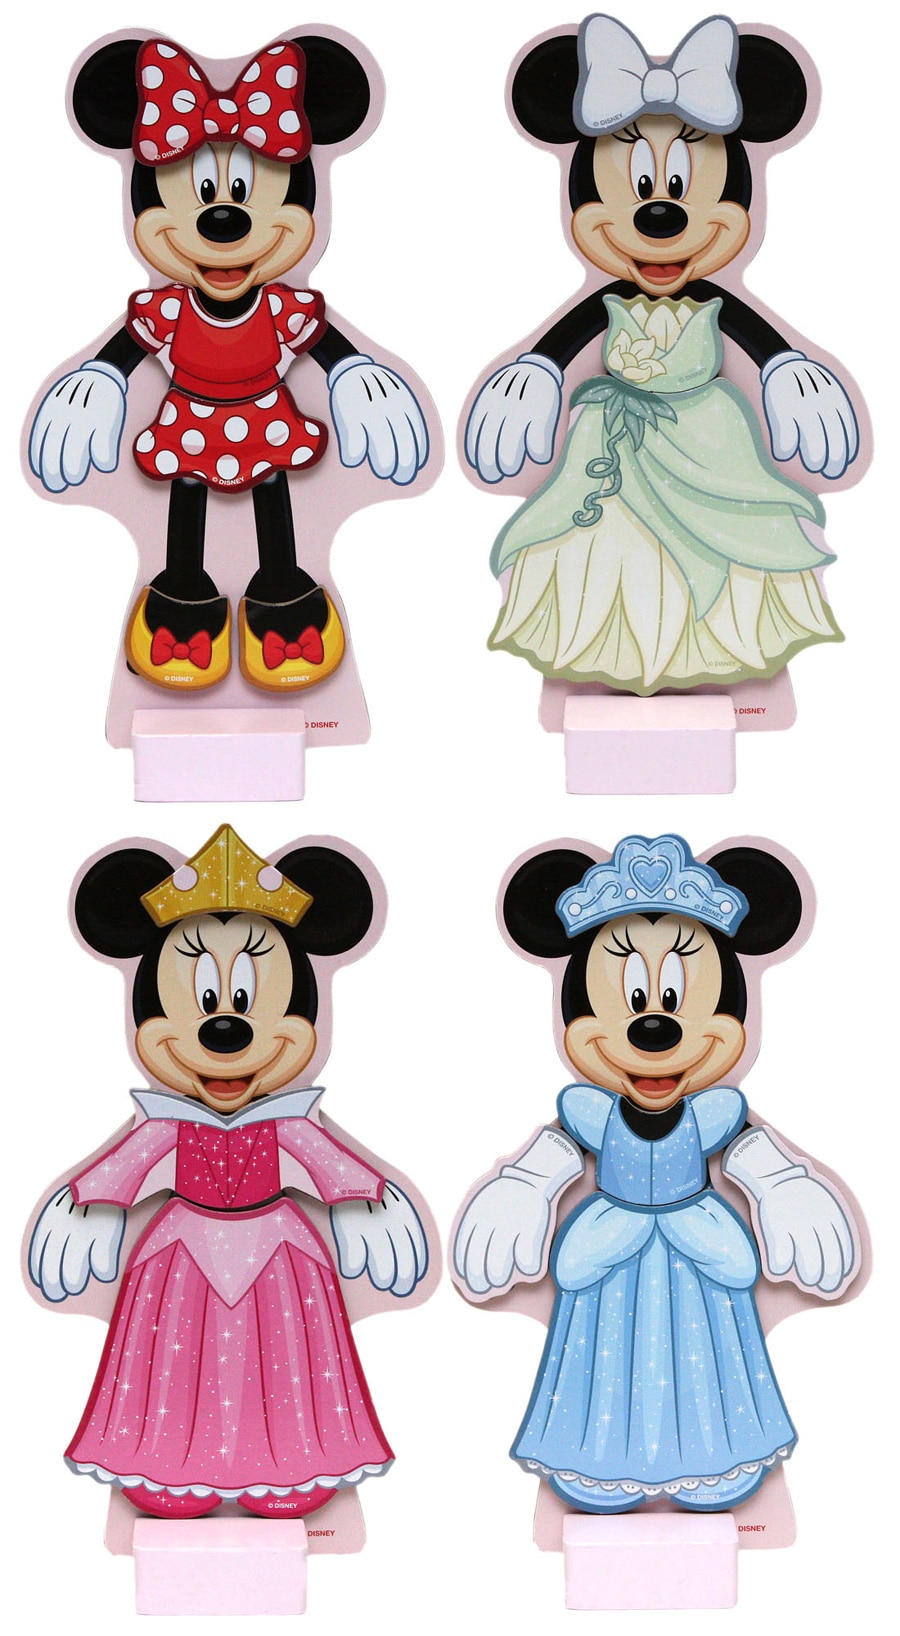 melissa and doug minnie mouse magnets